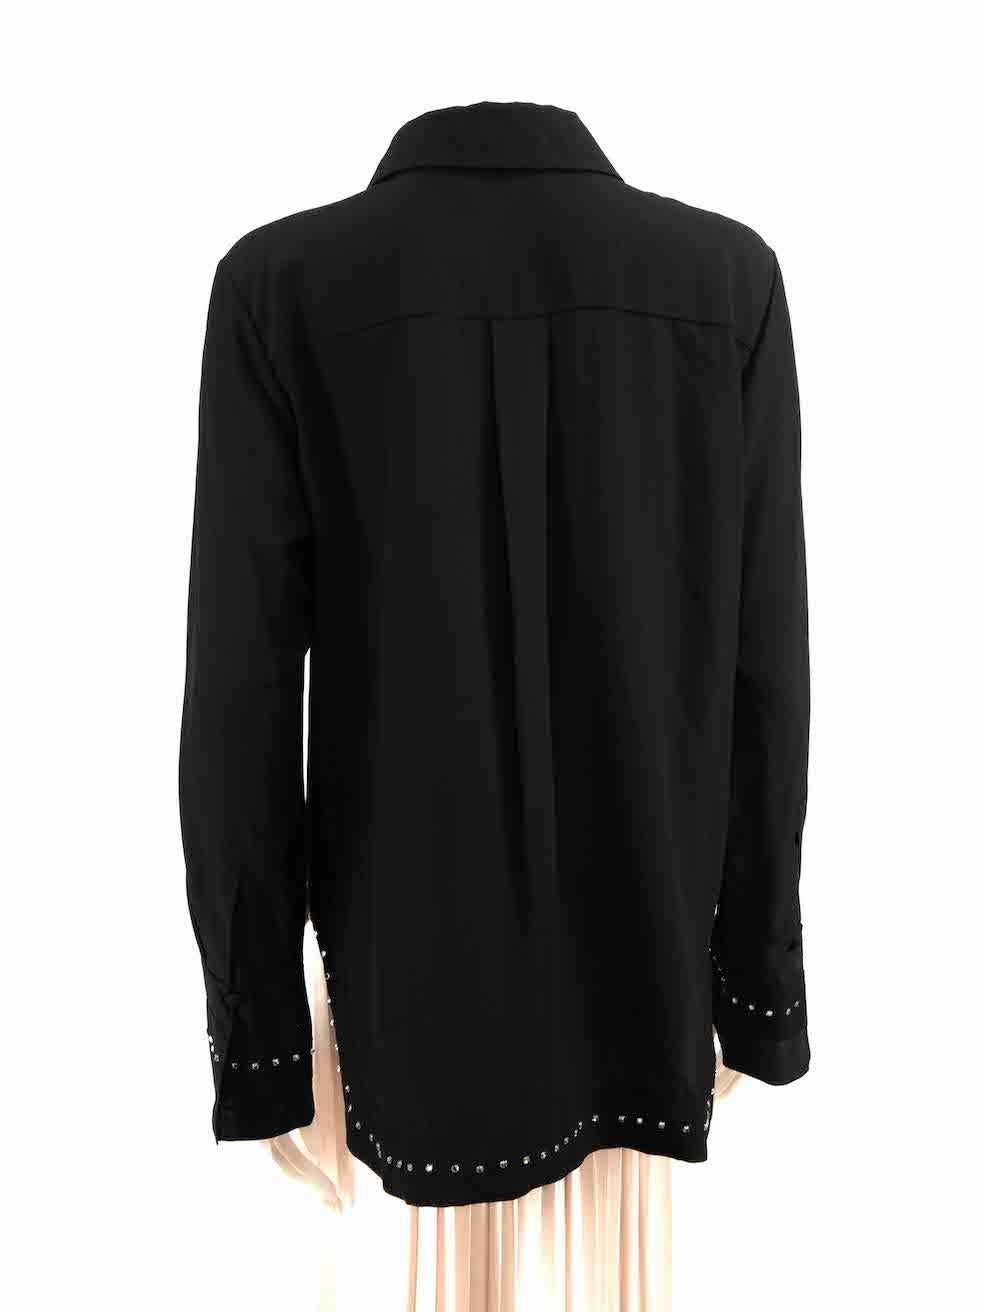 Chloé Black Silk Crystal Embellished Blouse Size XL In New Condition For Sale In London, GB